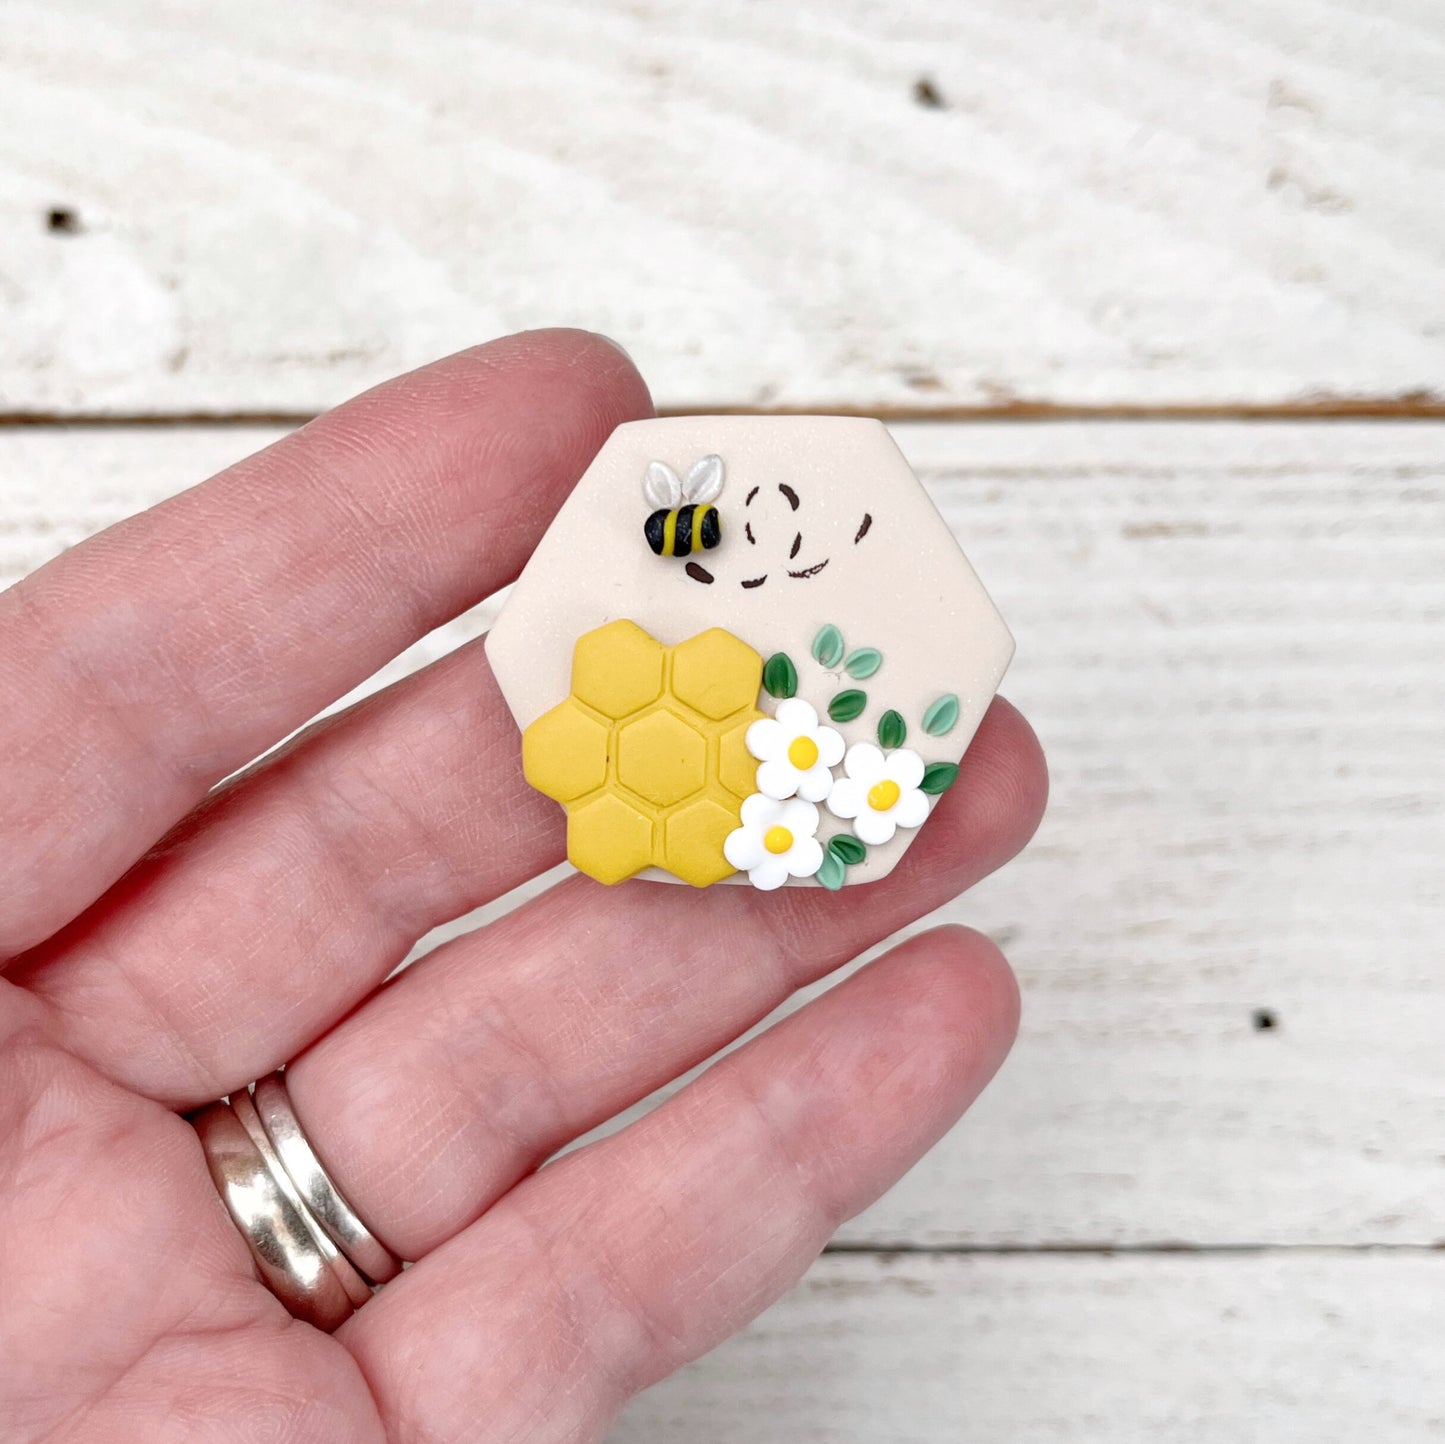 Beige hexagon bumble bee needle minder, sewing needle magnet, cross stitch embroidery magnets